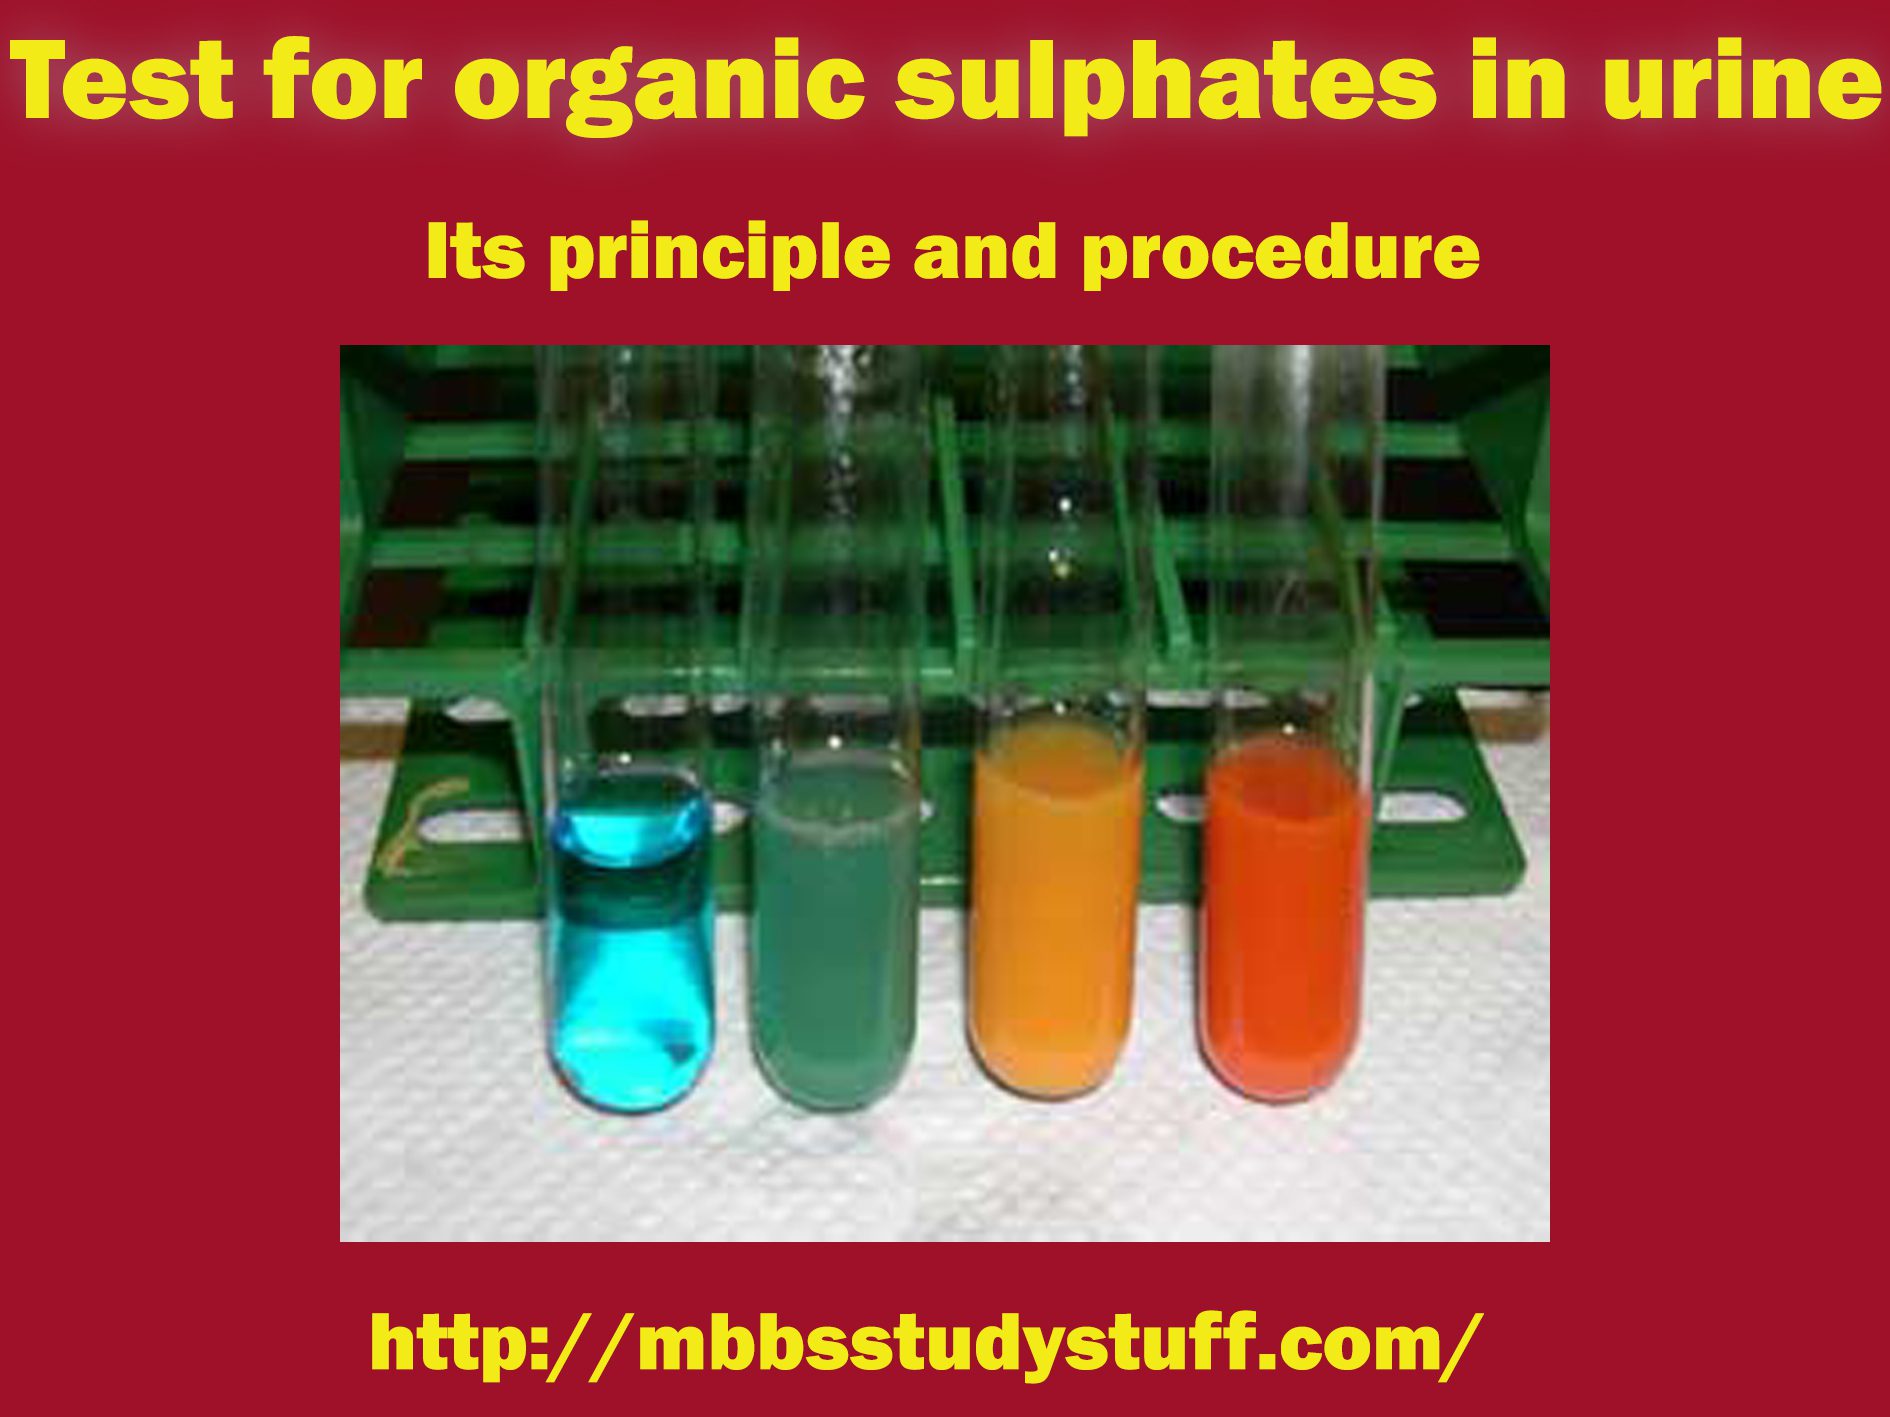 Test for organic sulphates in urine